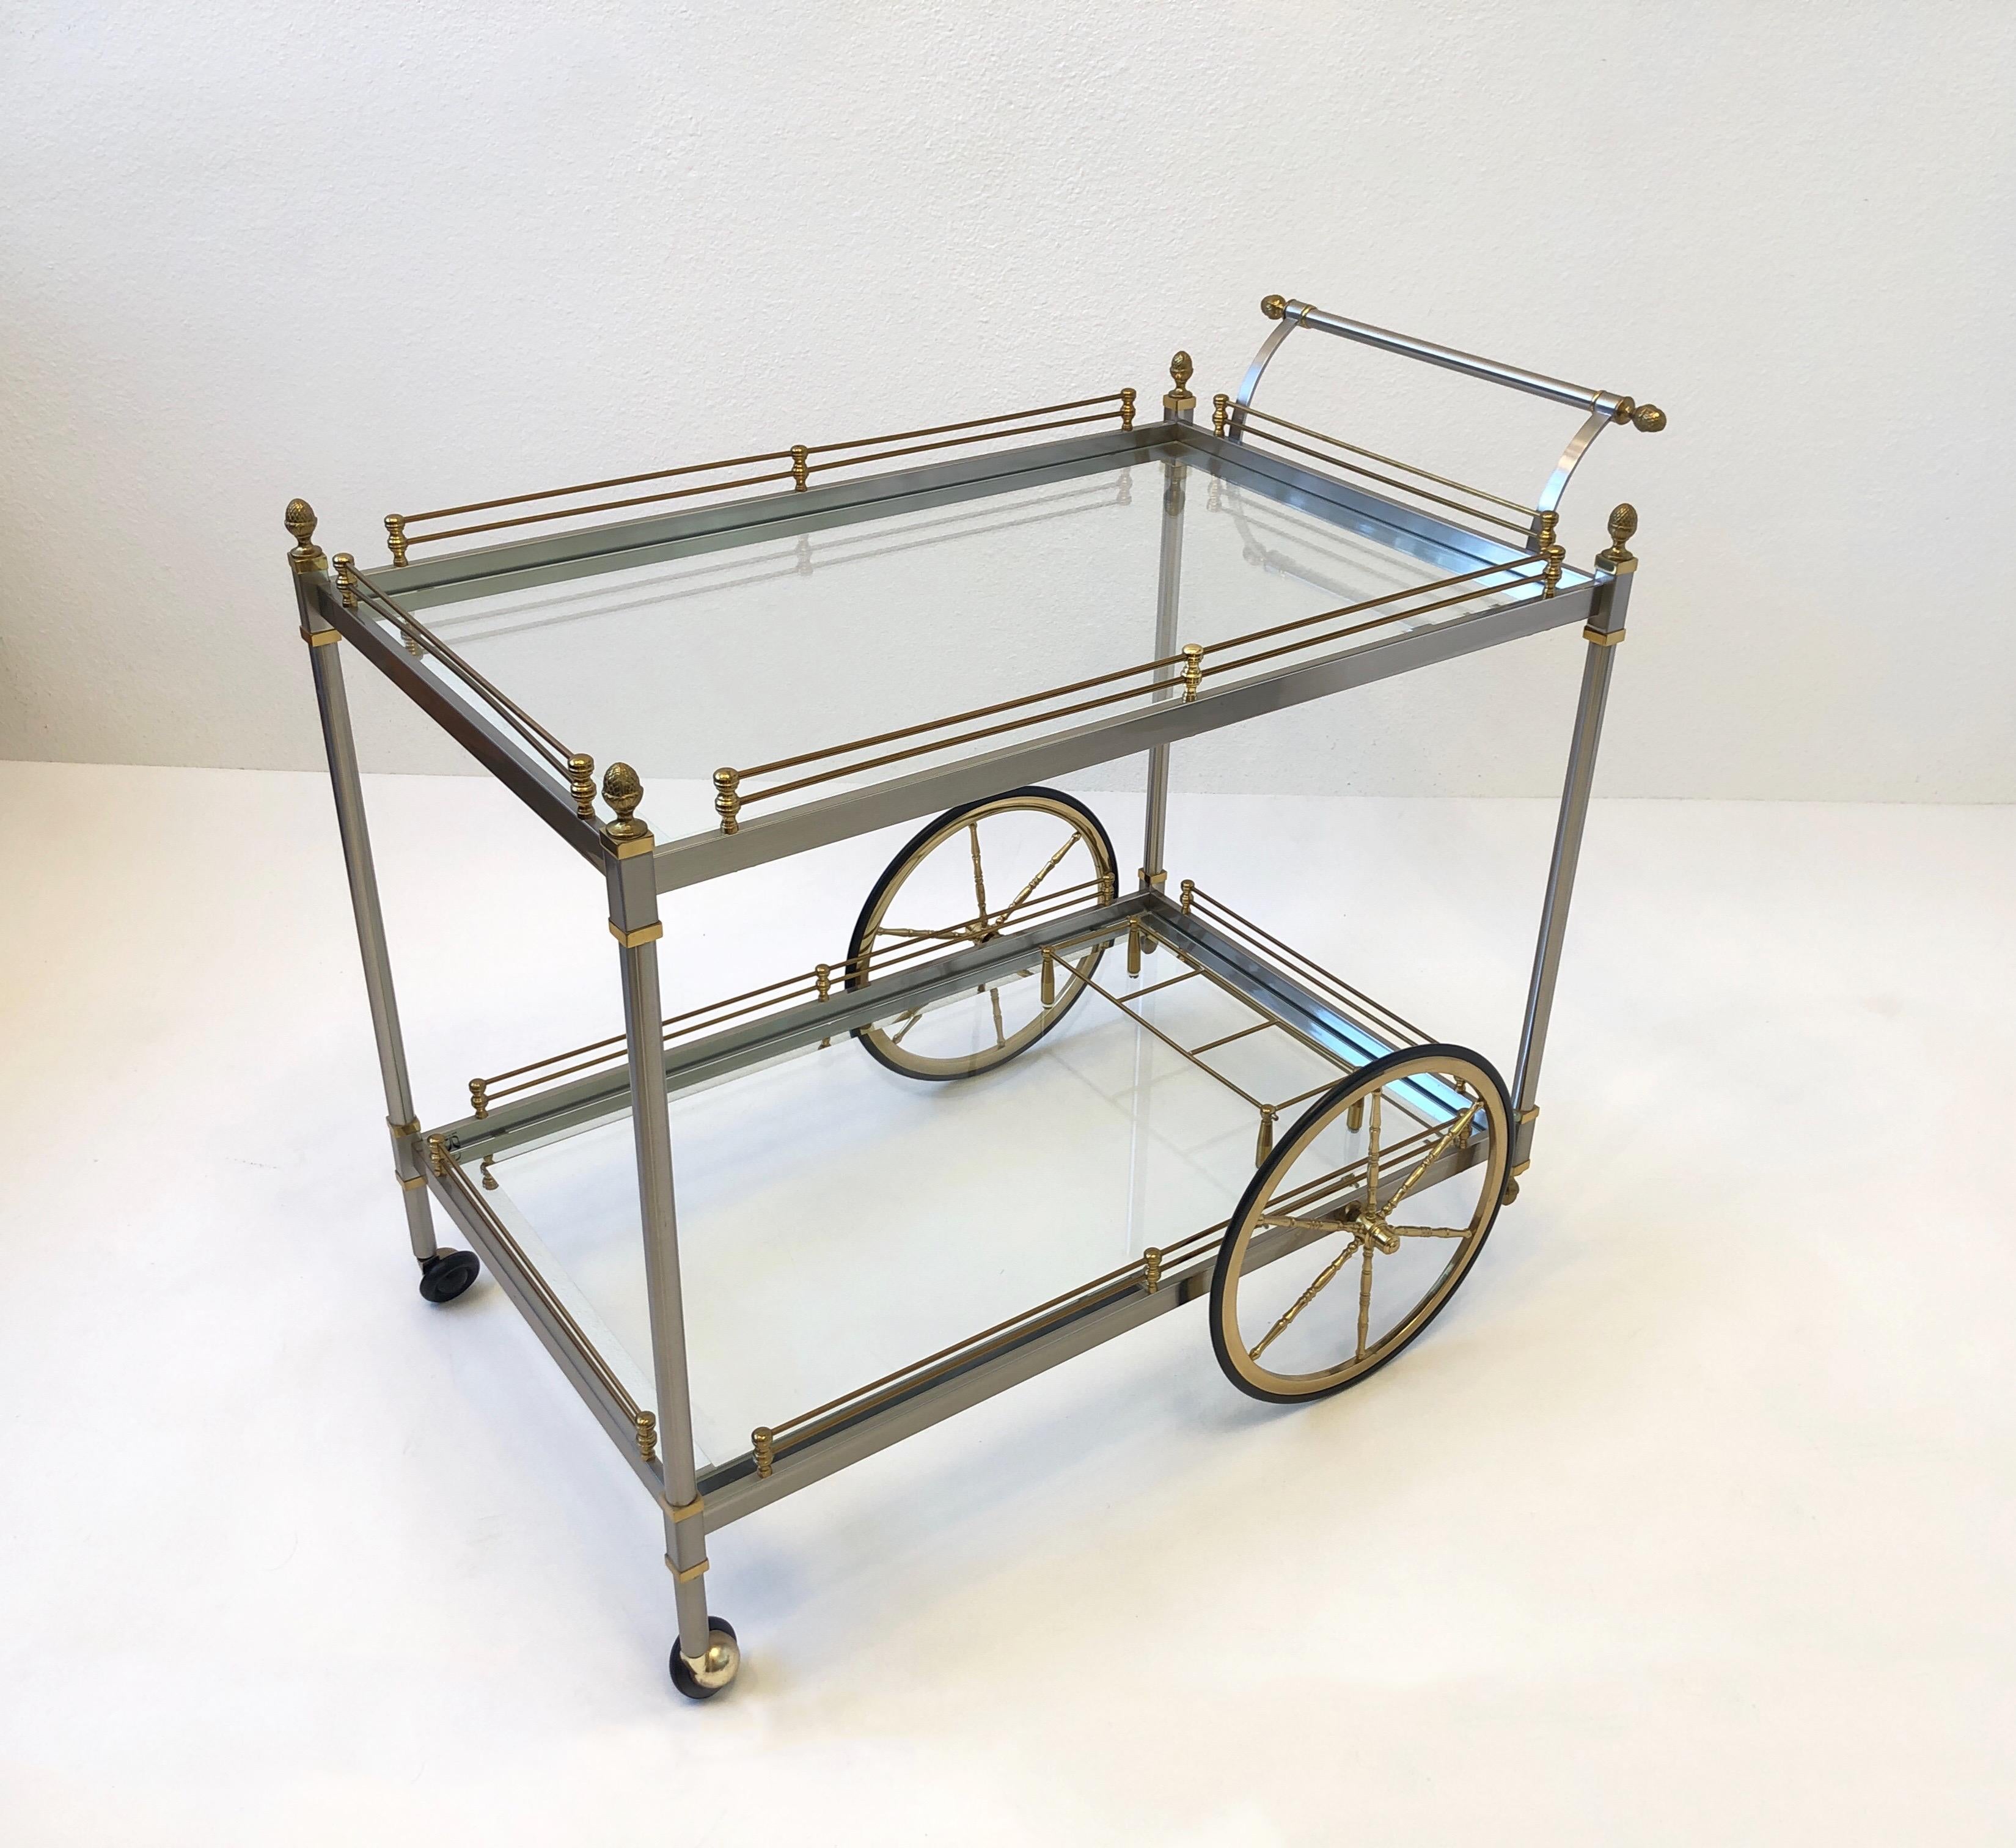 Glamorous 1970’s Italian two tier bar cart. 
Constructed of brass and brushed steel with mirror framed glass shelves. 
This is in beautiful vintage condition. 
Measurements: 34.5” Wide, 22” Deep, 30” High.